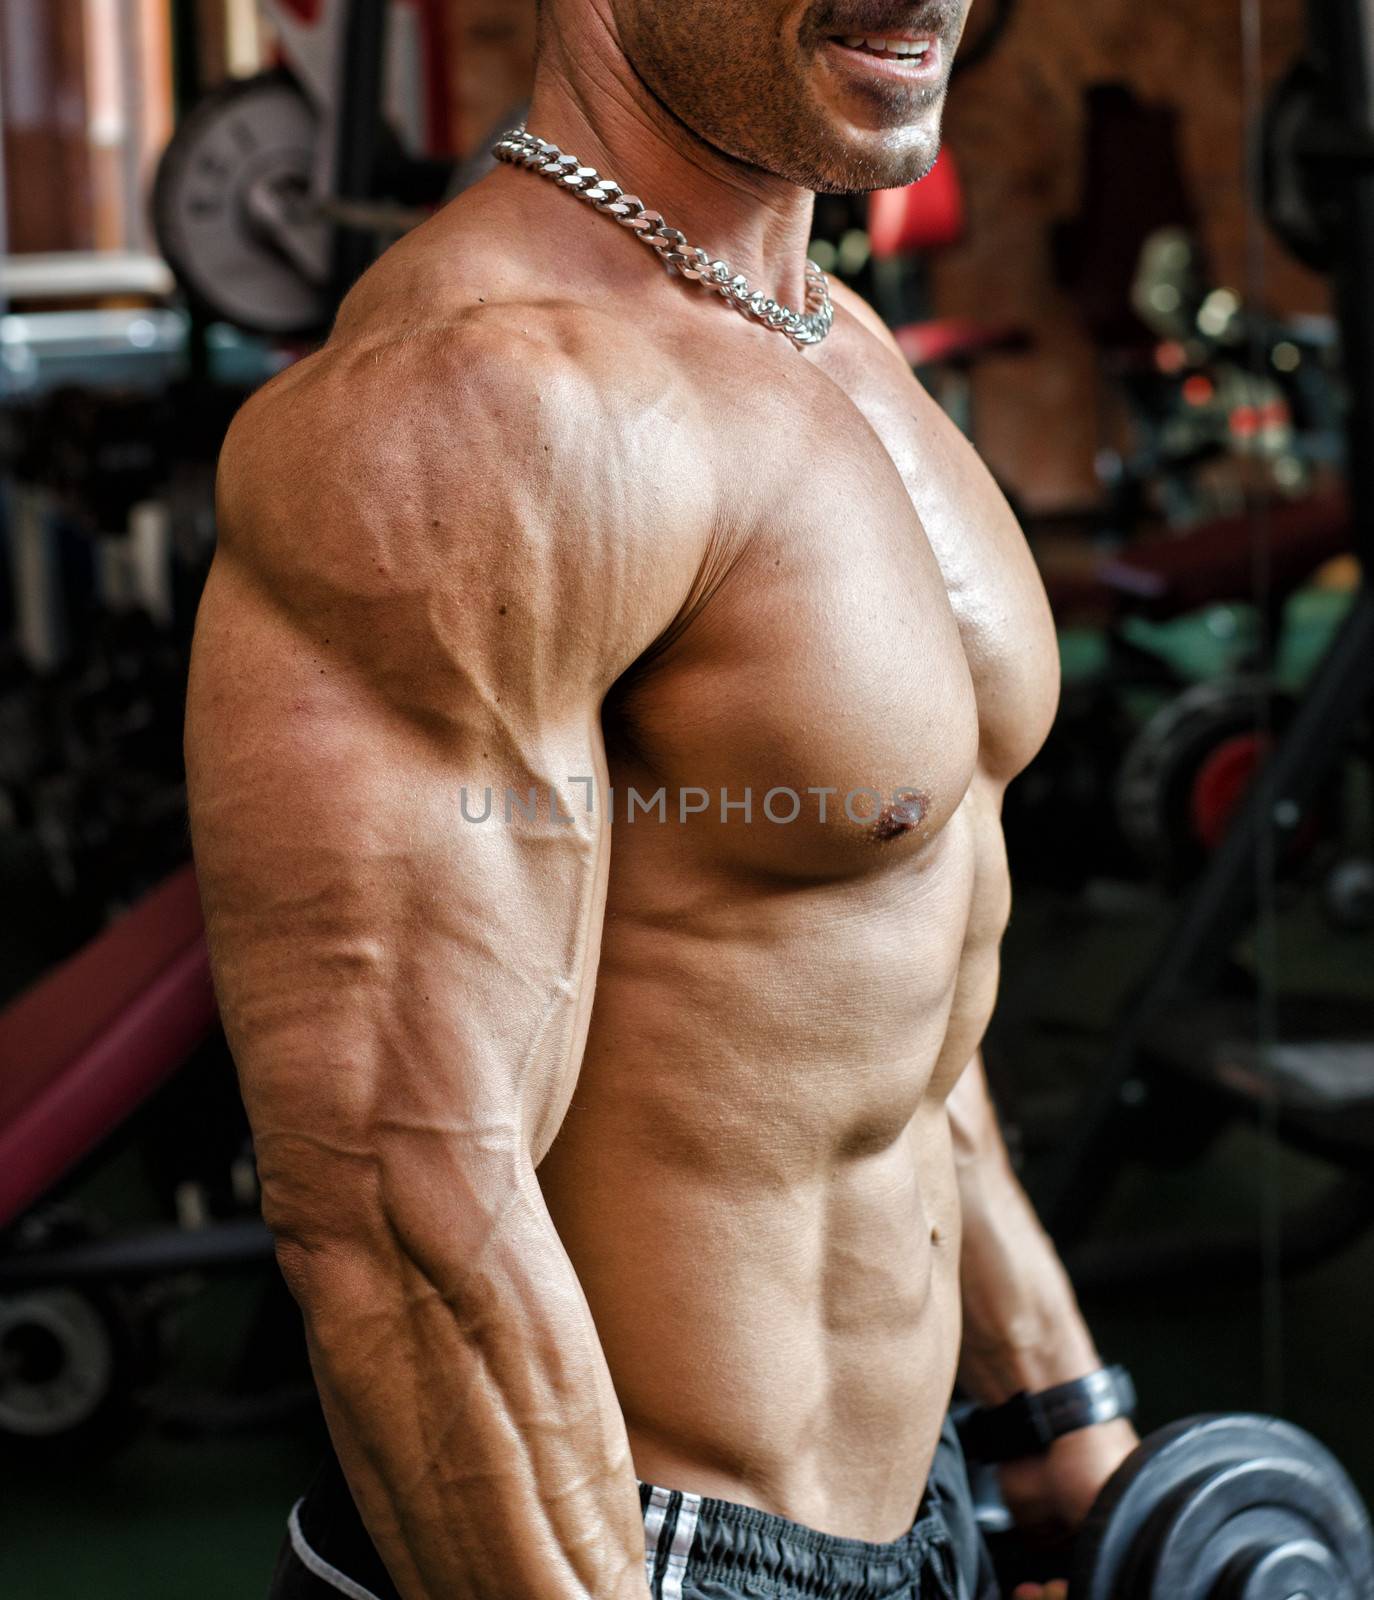 Torso of muscular male bodybuilder working out in gym with dumbells in his hands